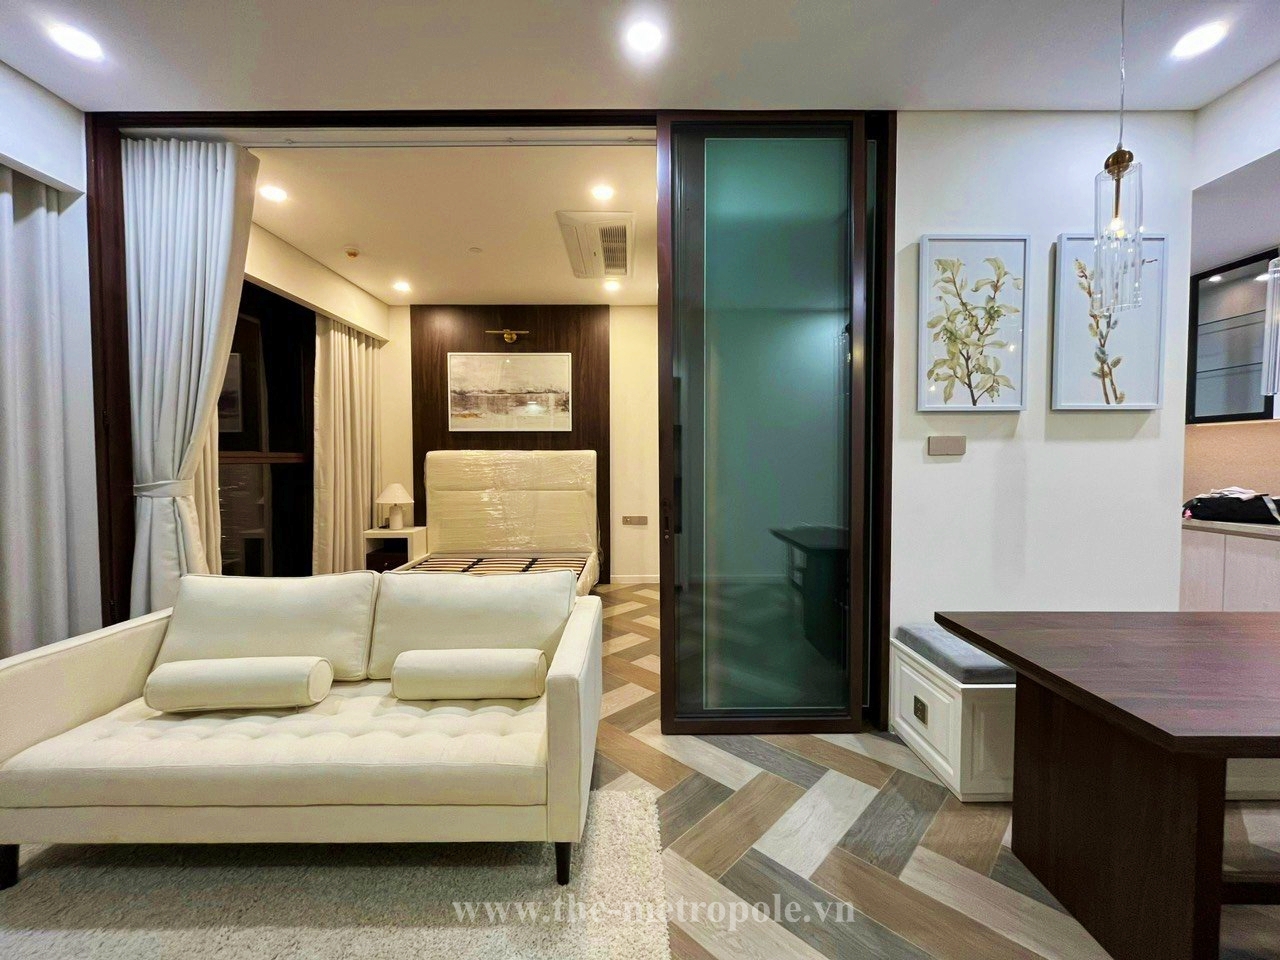 A high floor 1br apartment for rent in The Galleria - The Metropole Thu Thiem